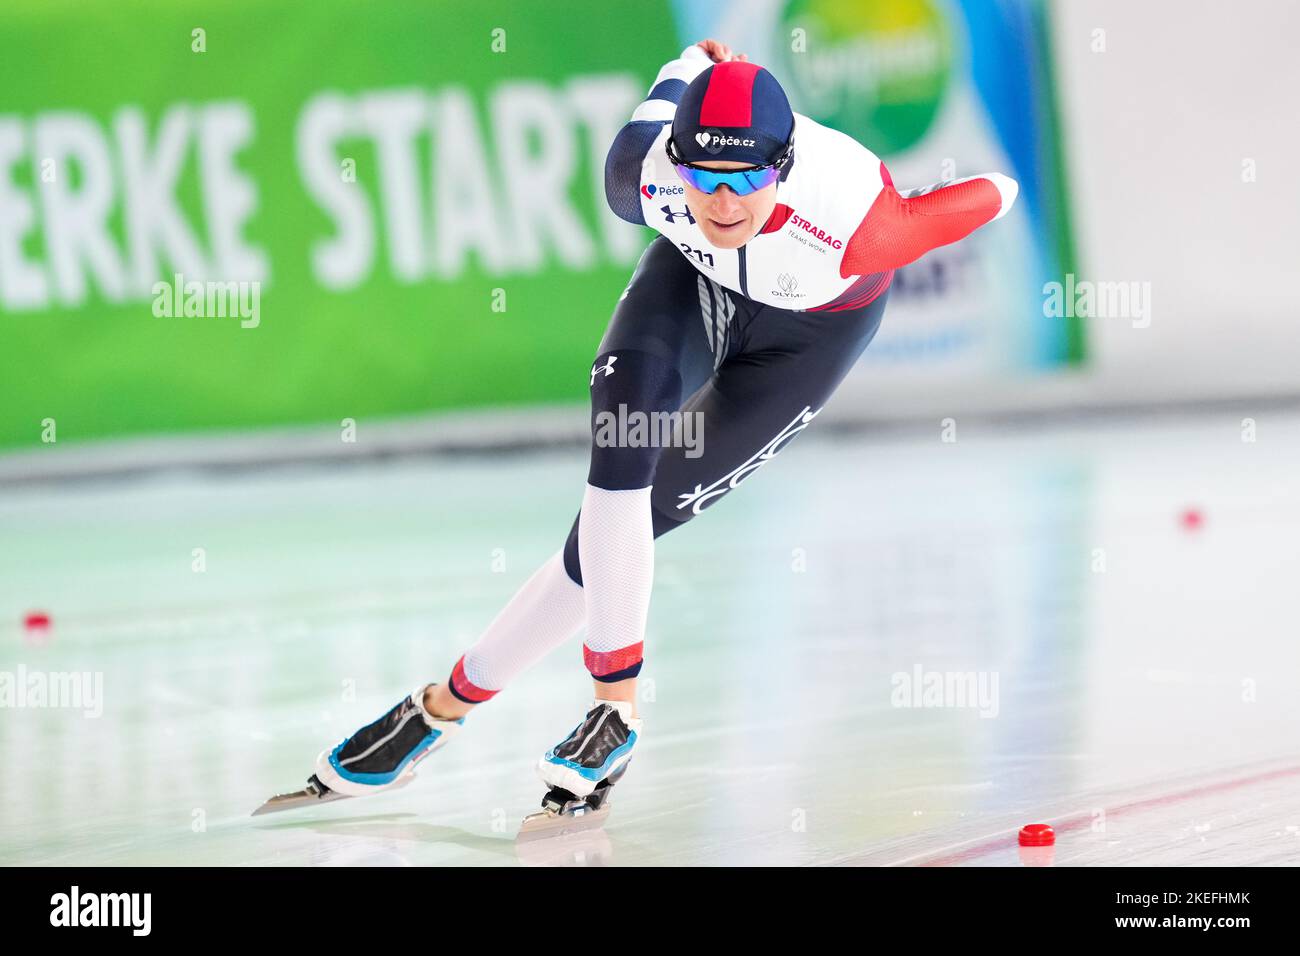 STAVANGER, NORWAY - NOVEMBER 12: Martina Sablikova of Czech Republic competing on the Women's A Group 1500m during the Speedskating World Cup 1 on November 12, 2022 in Stavanger, Norway (Photo by Douwe Bijlsma/Orange Pictures) Stock Photo